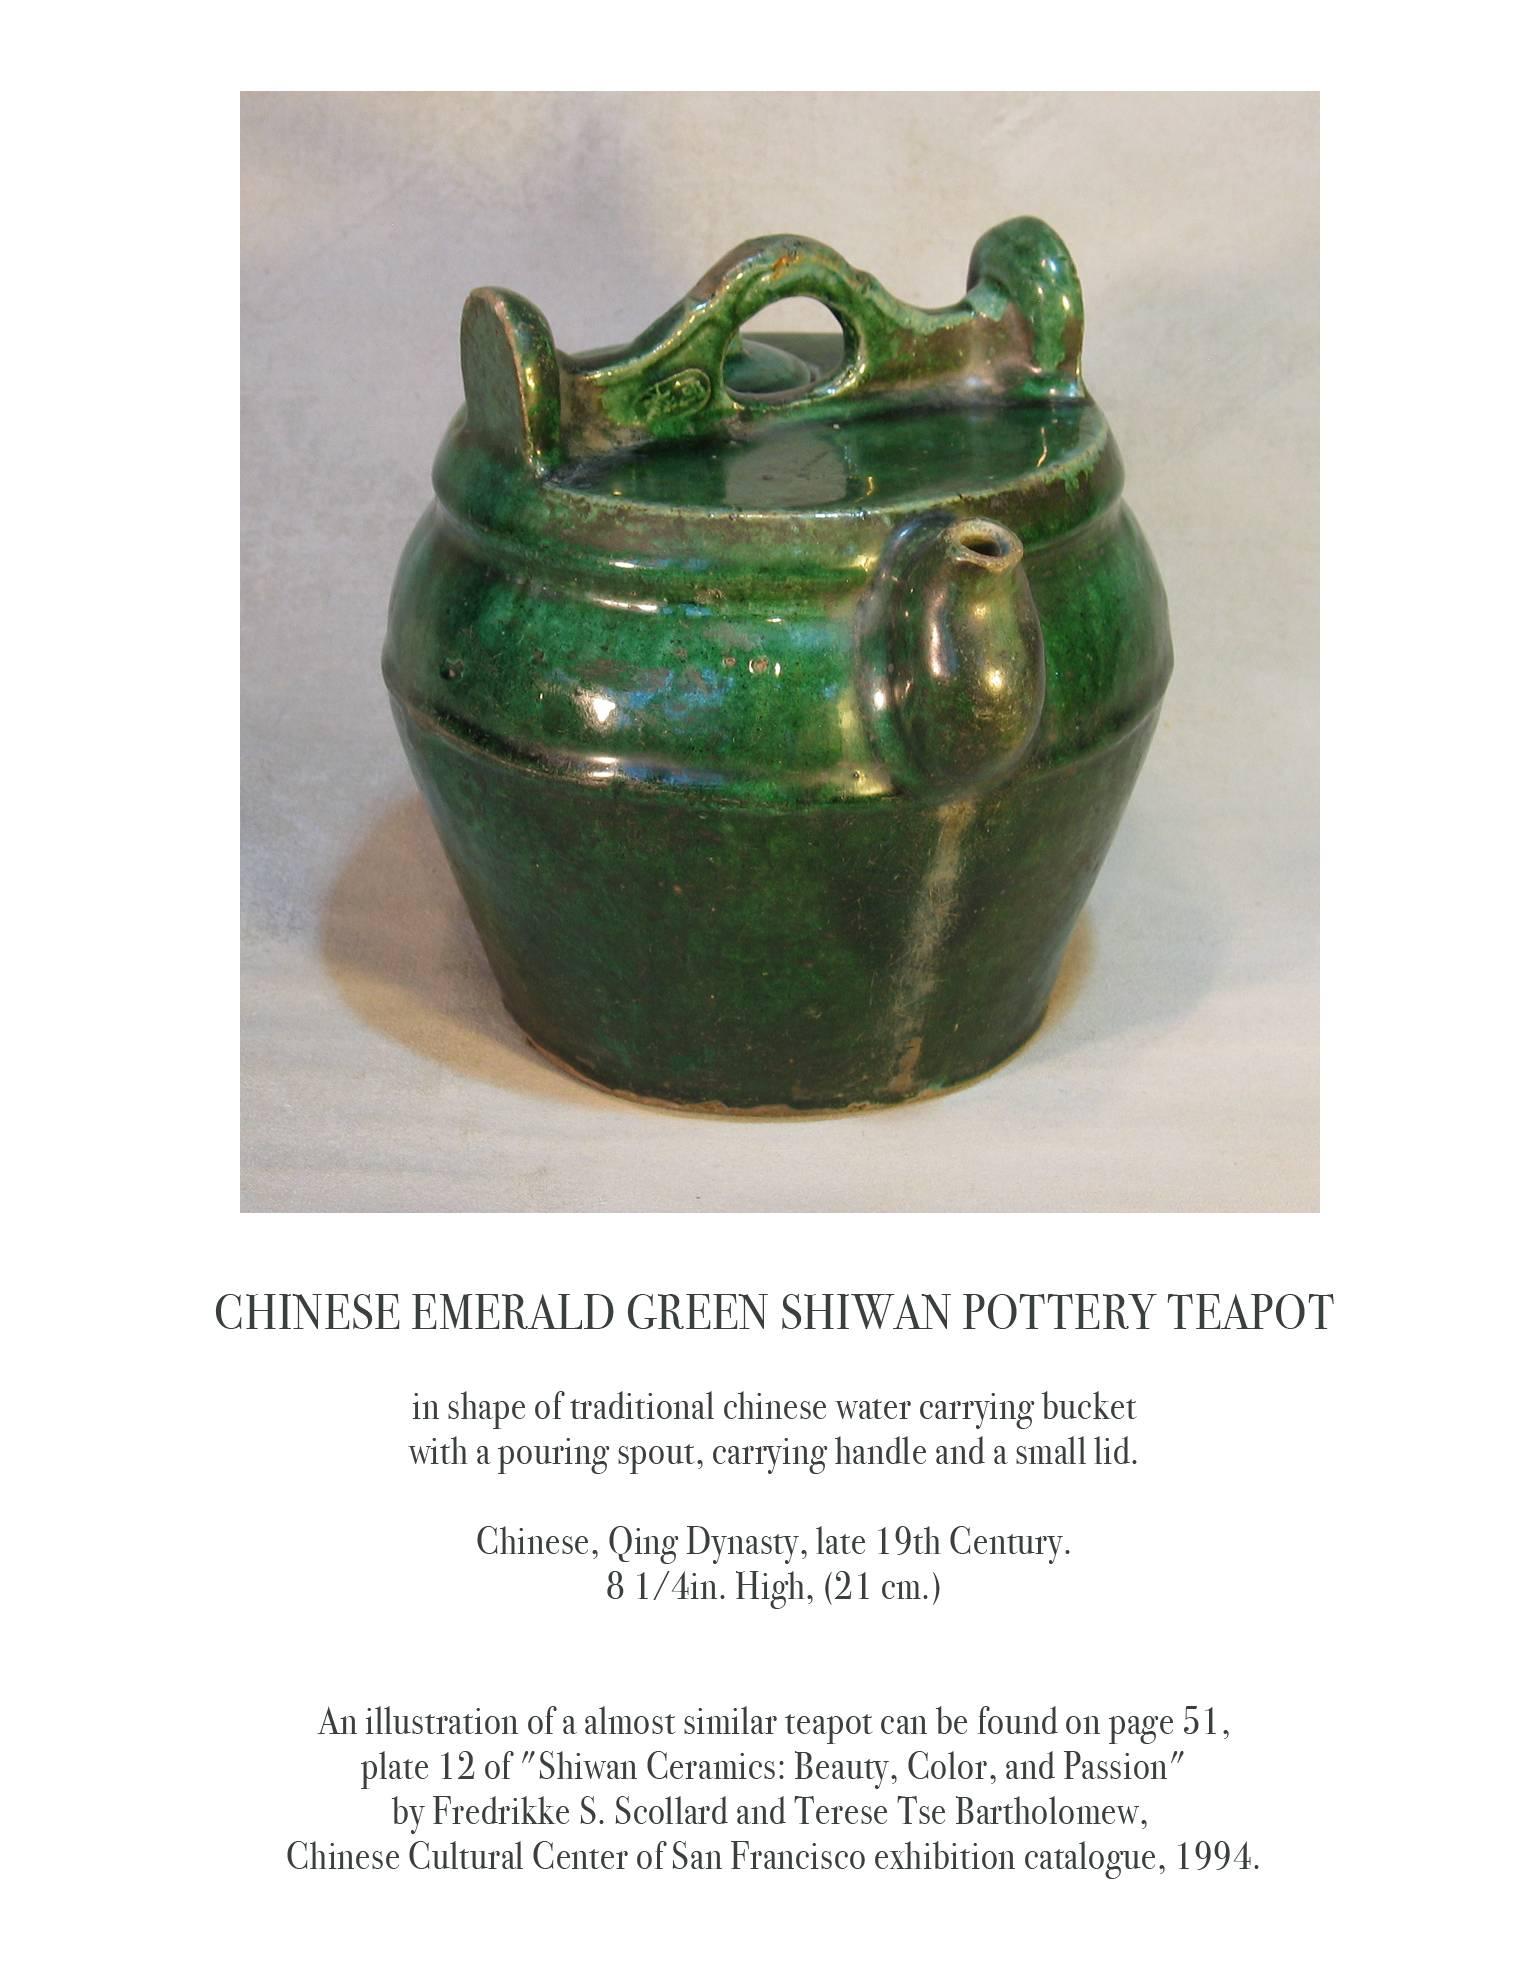 Chinese emerald green shiwan pottery teapot, Chinese, Qing Dynasty, late 19th century. In the shape of a traditional Chinese water carrying bucket with a pouring spout, carrying handle and a small lid. The teapot measures 8 1/4